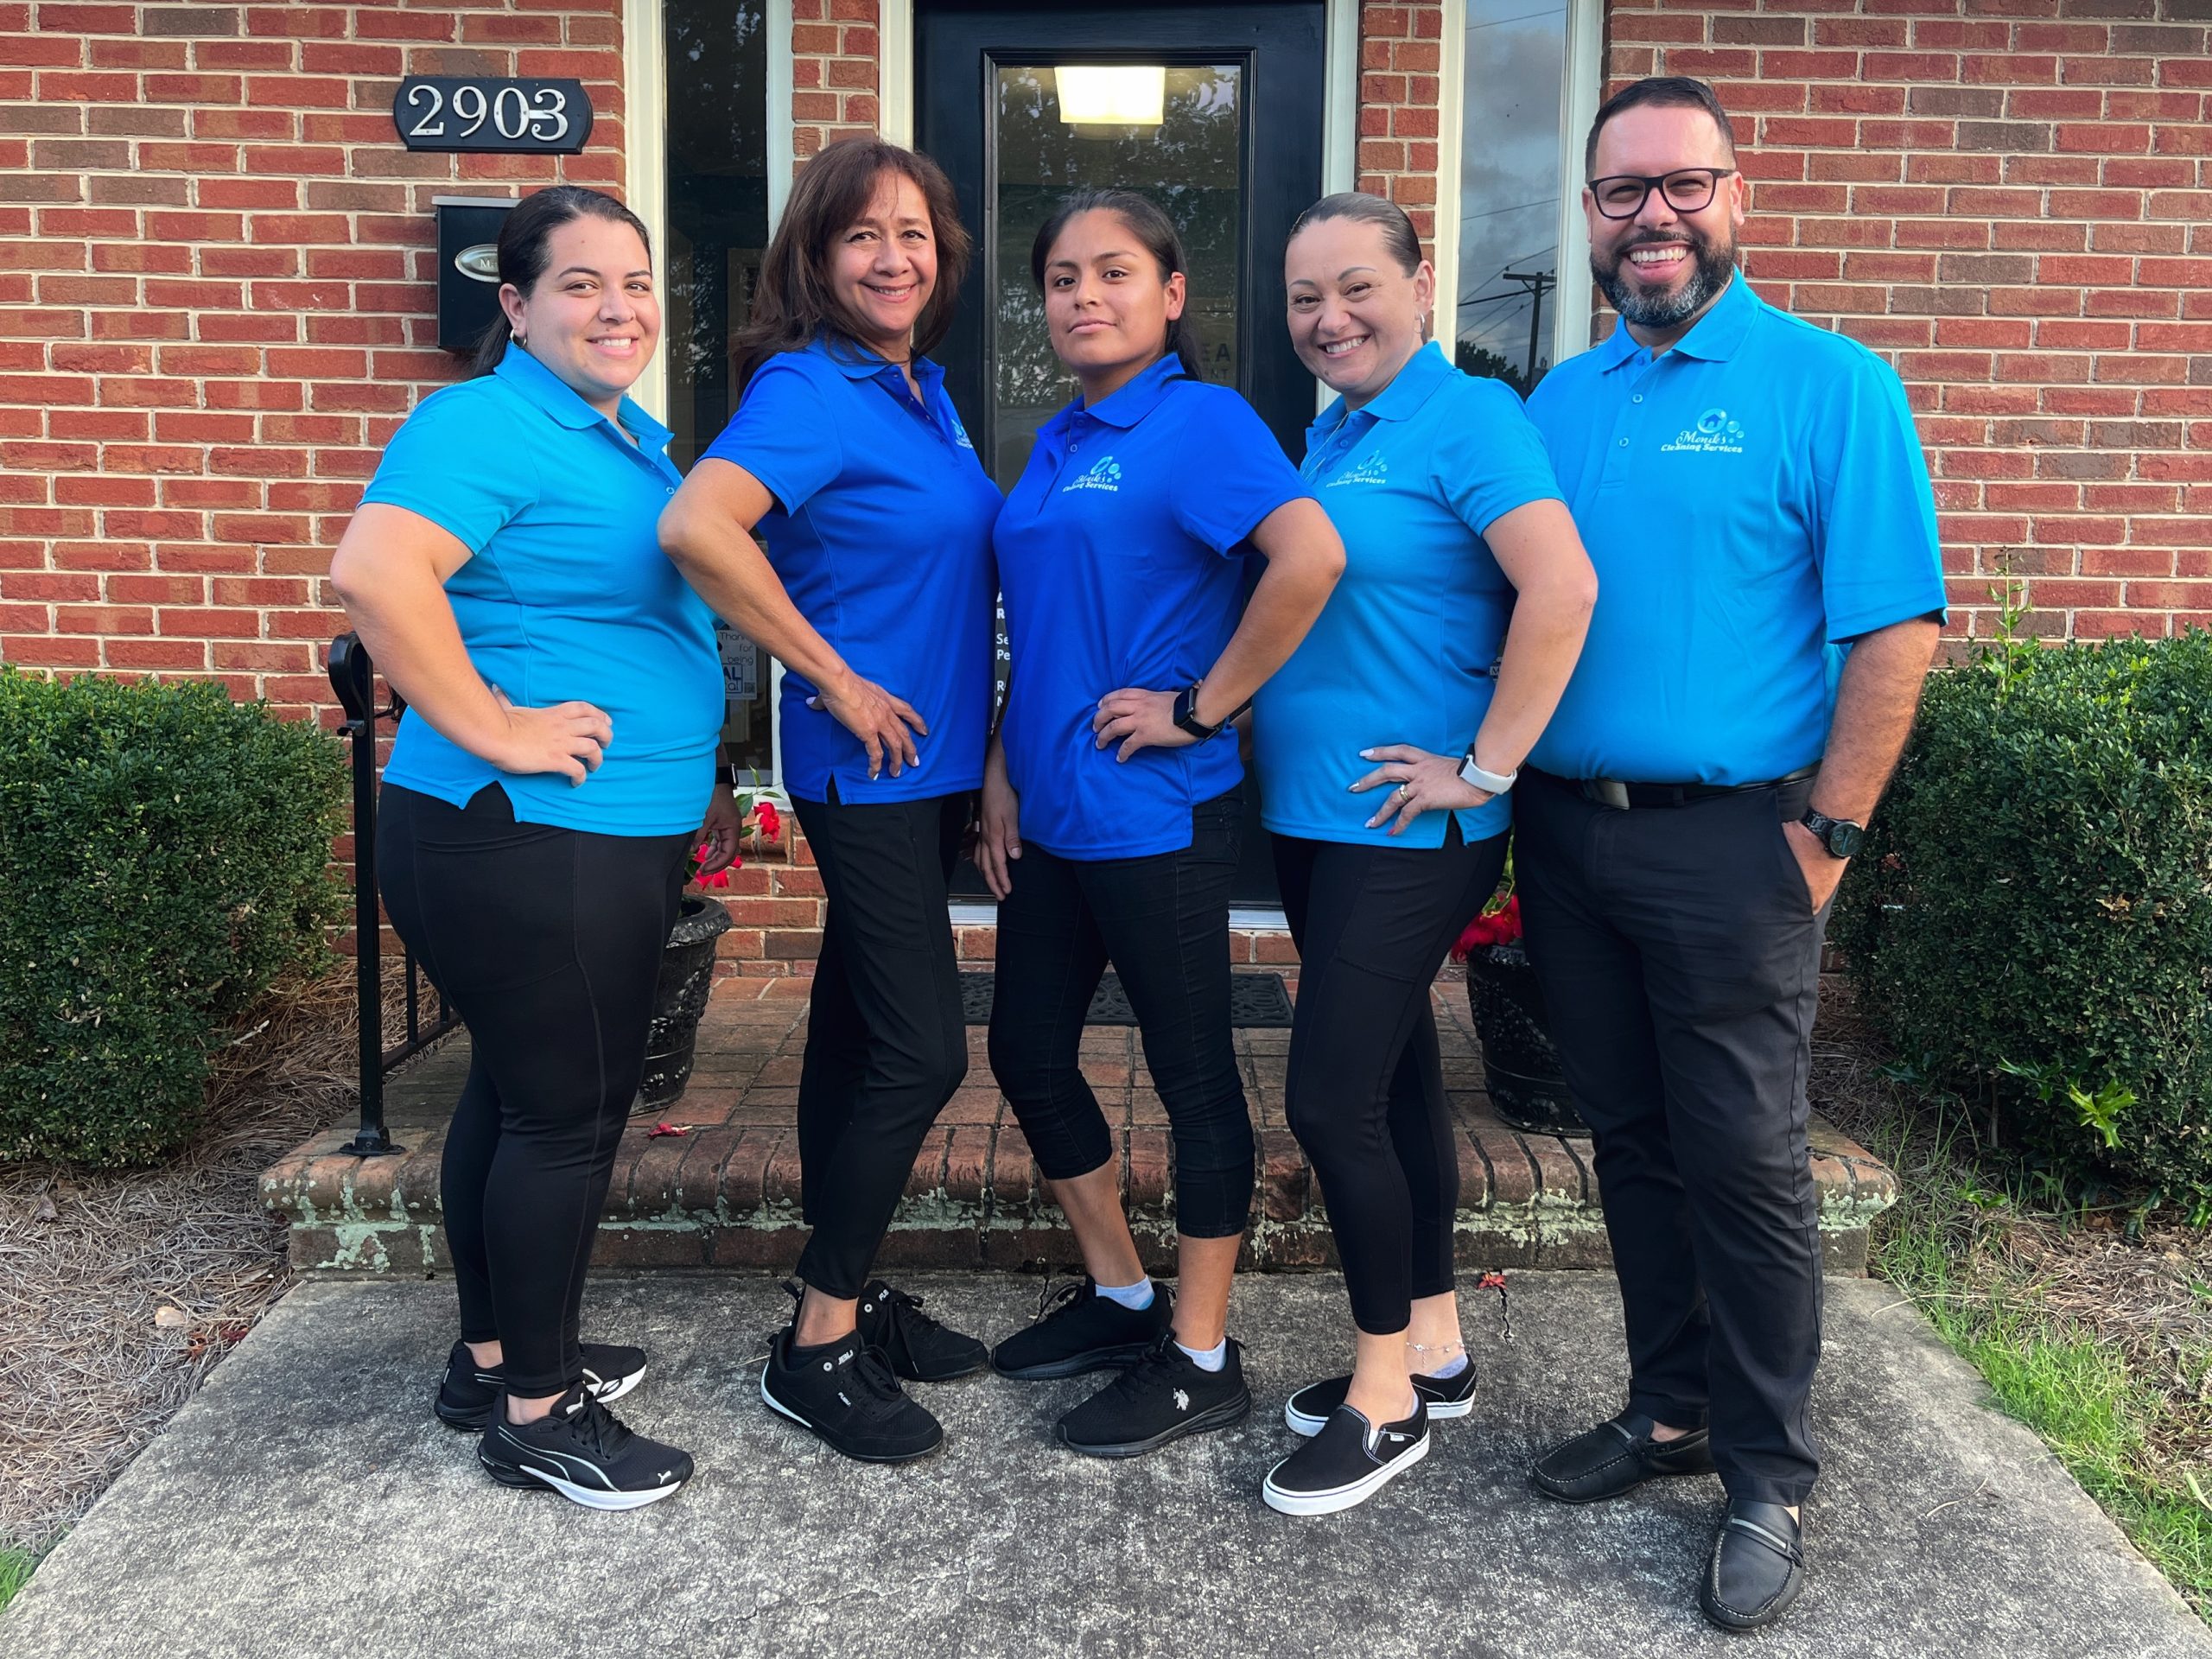 Monik's Cleaning Services Main Team